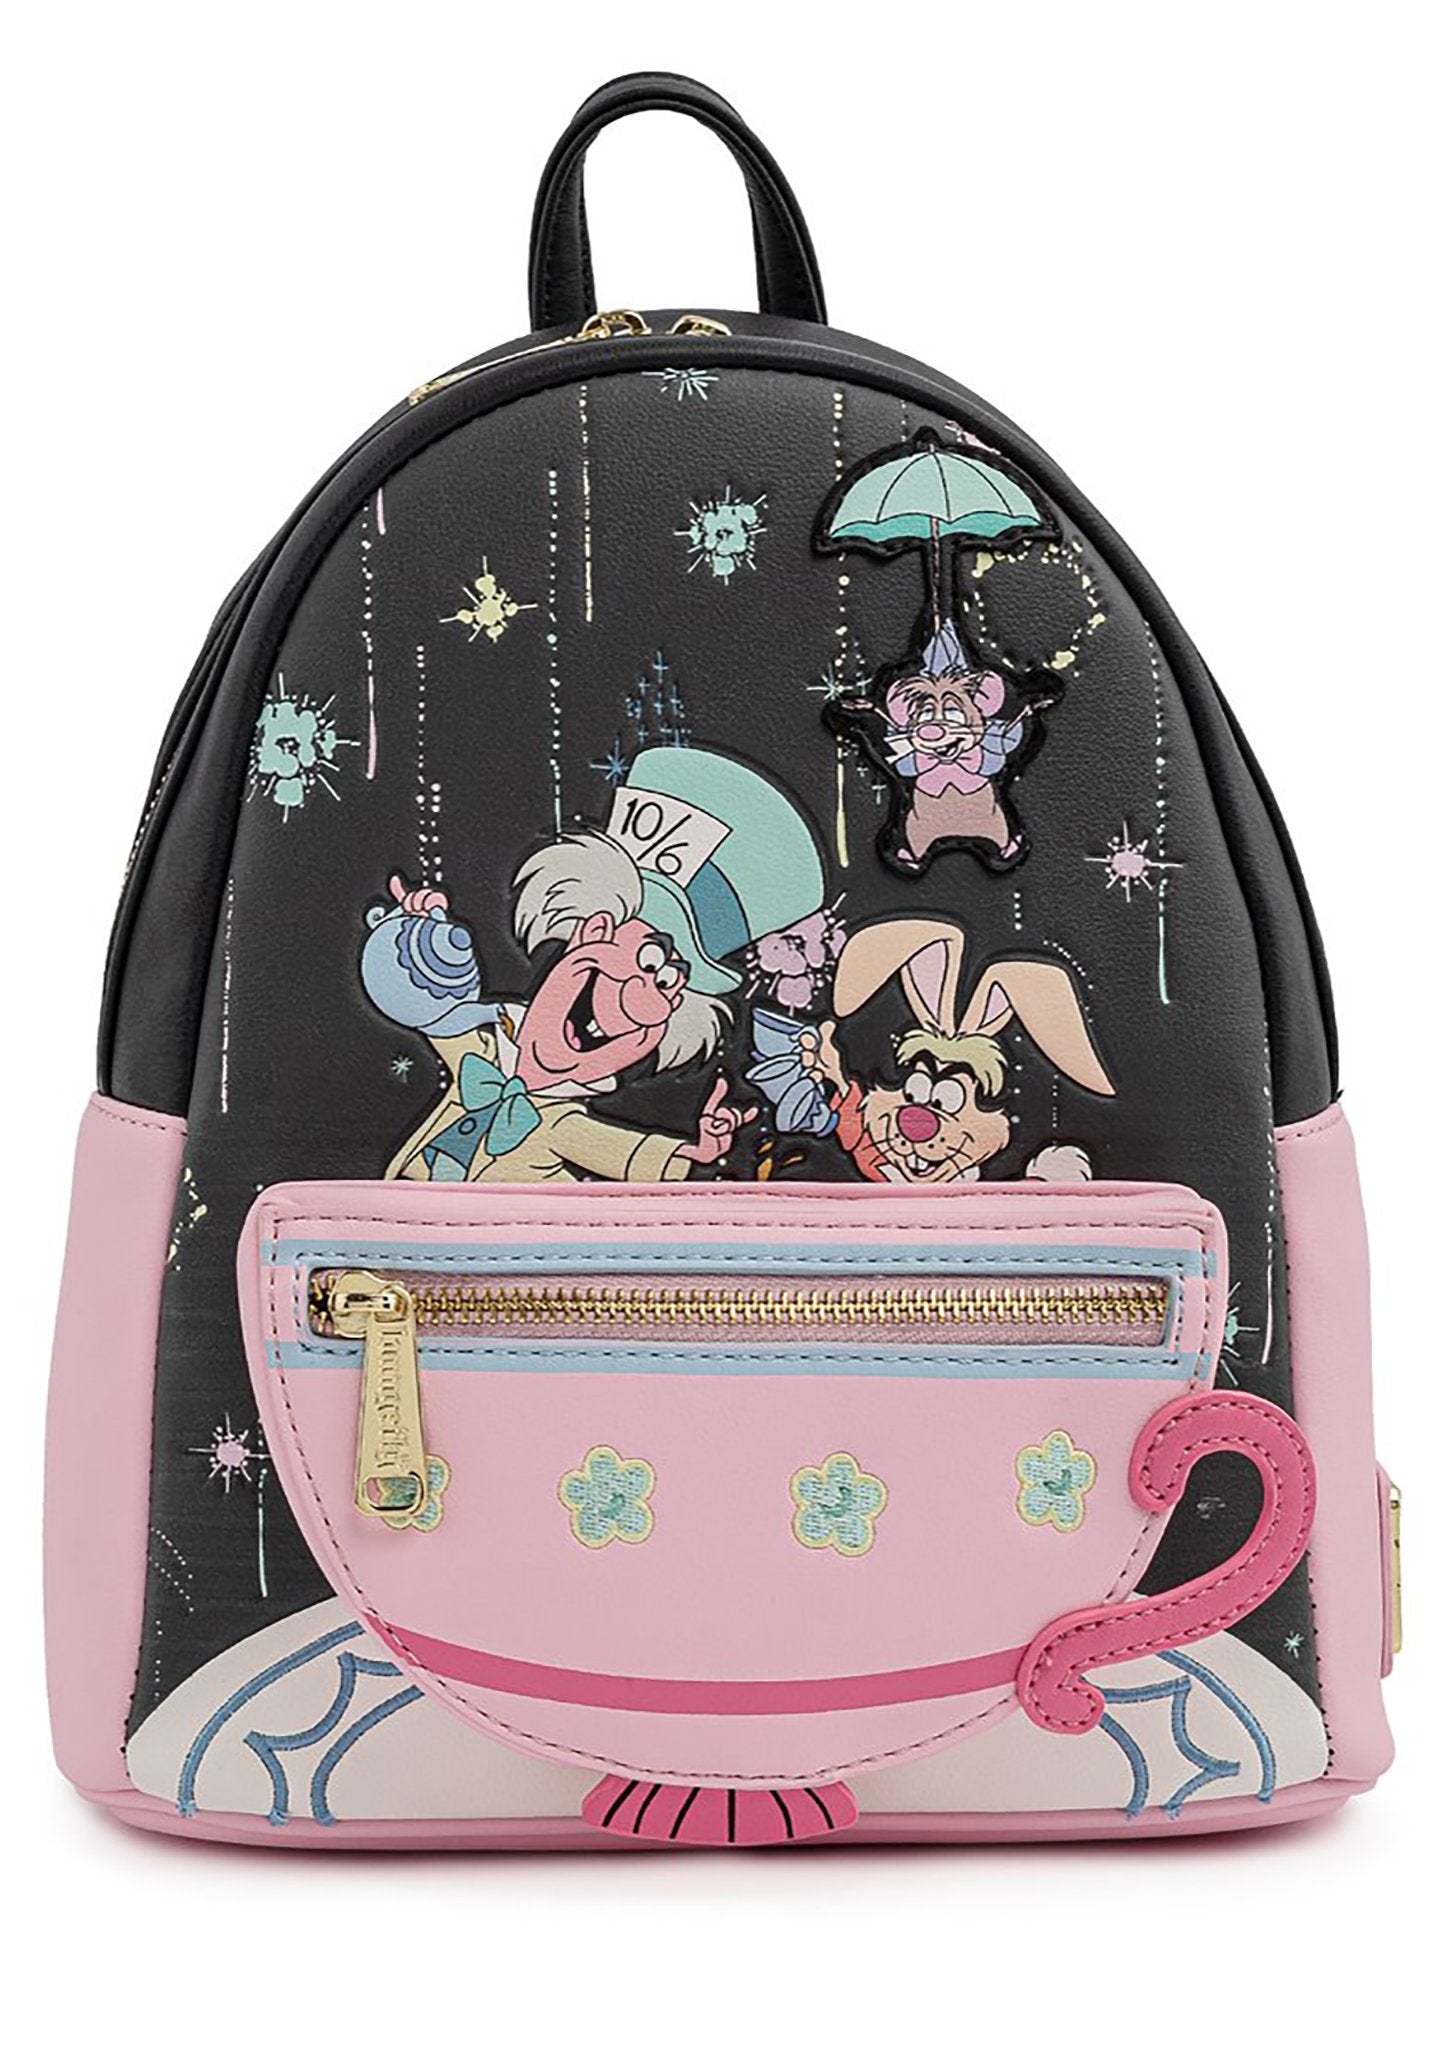 Disney Alice In Wonderland A Very Merry Unbirthday To You Mini Backpack